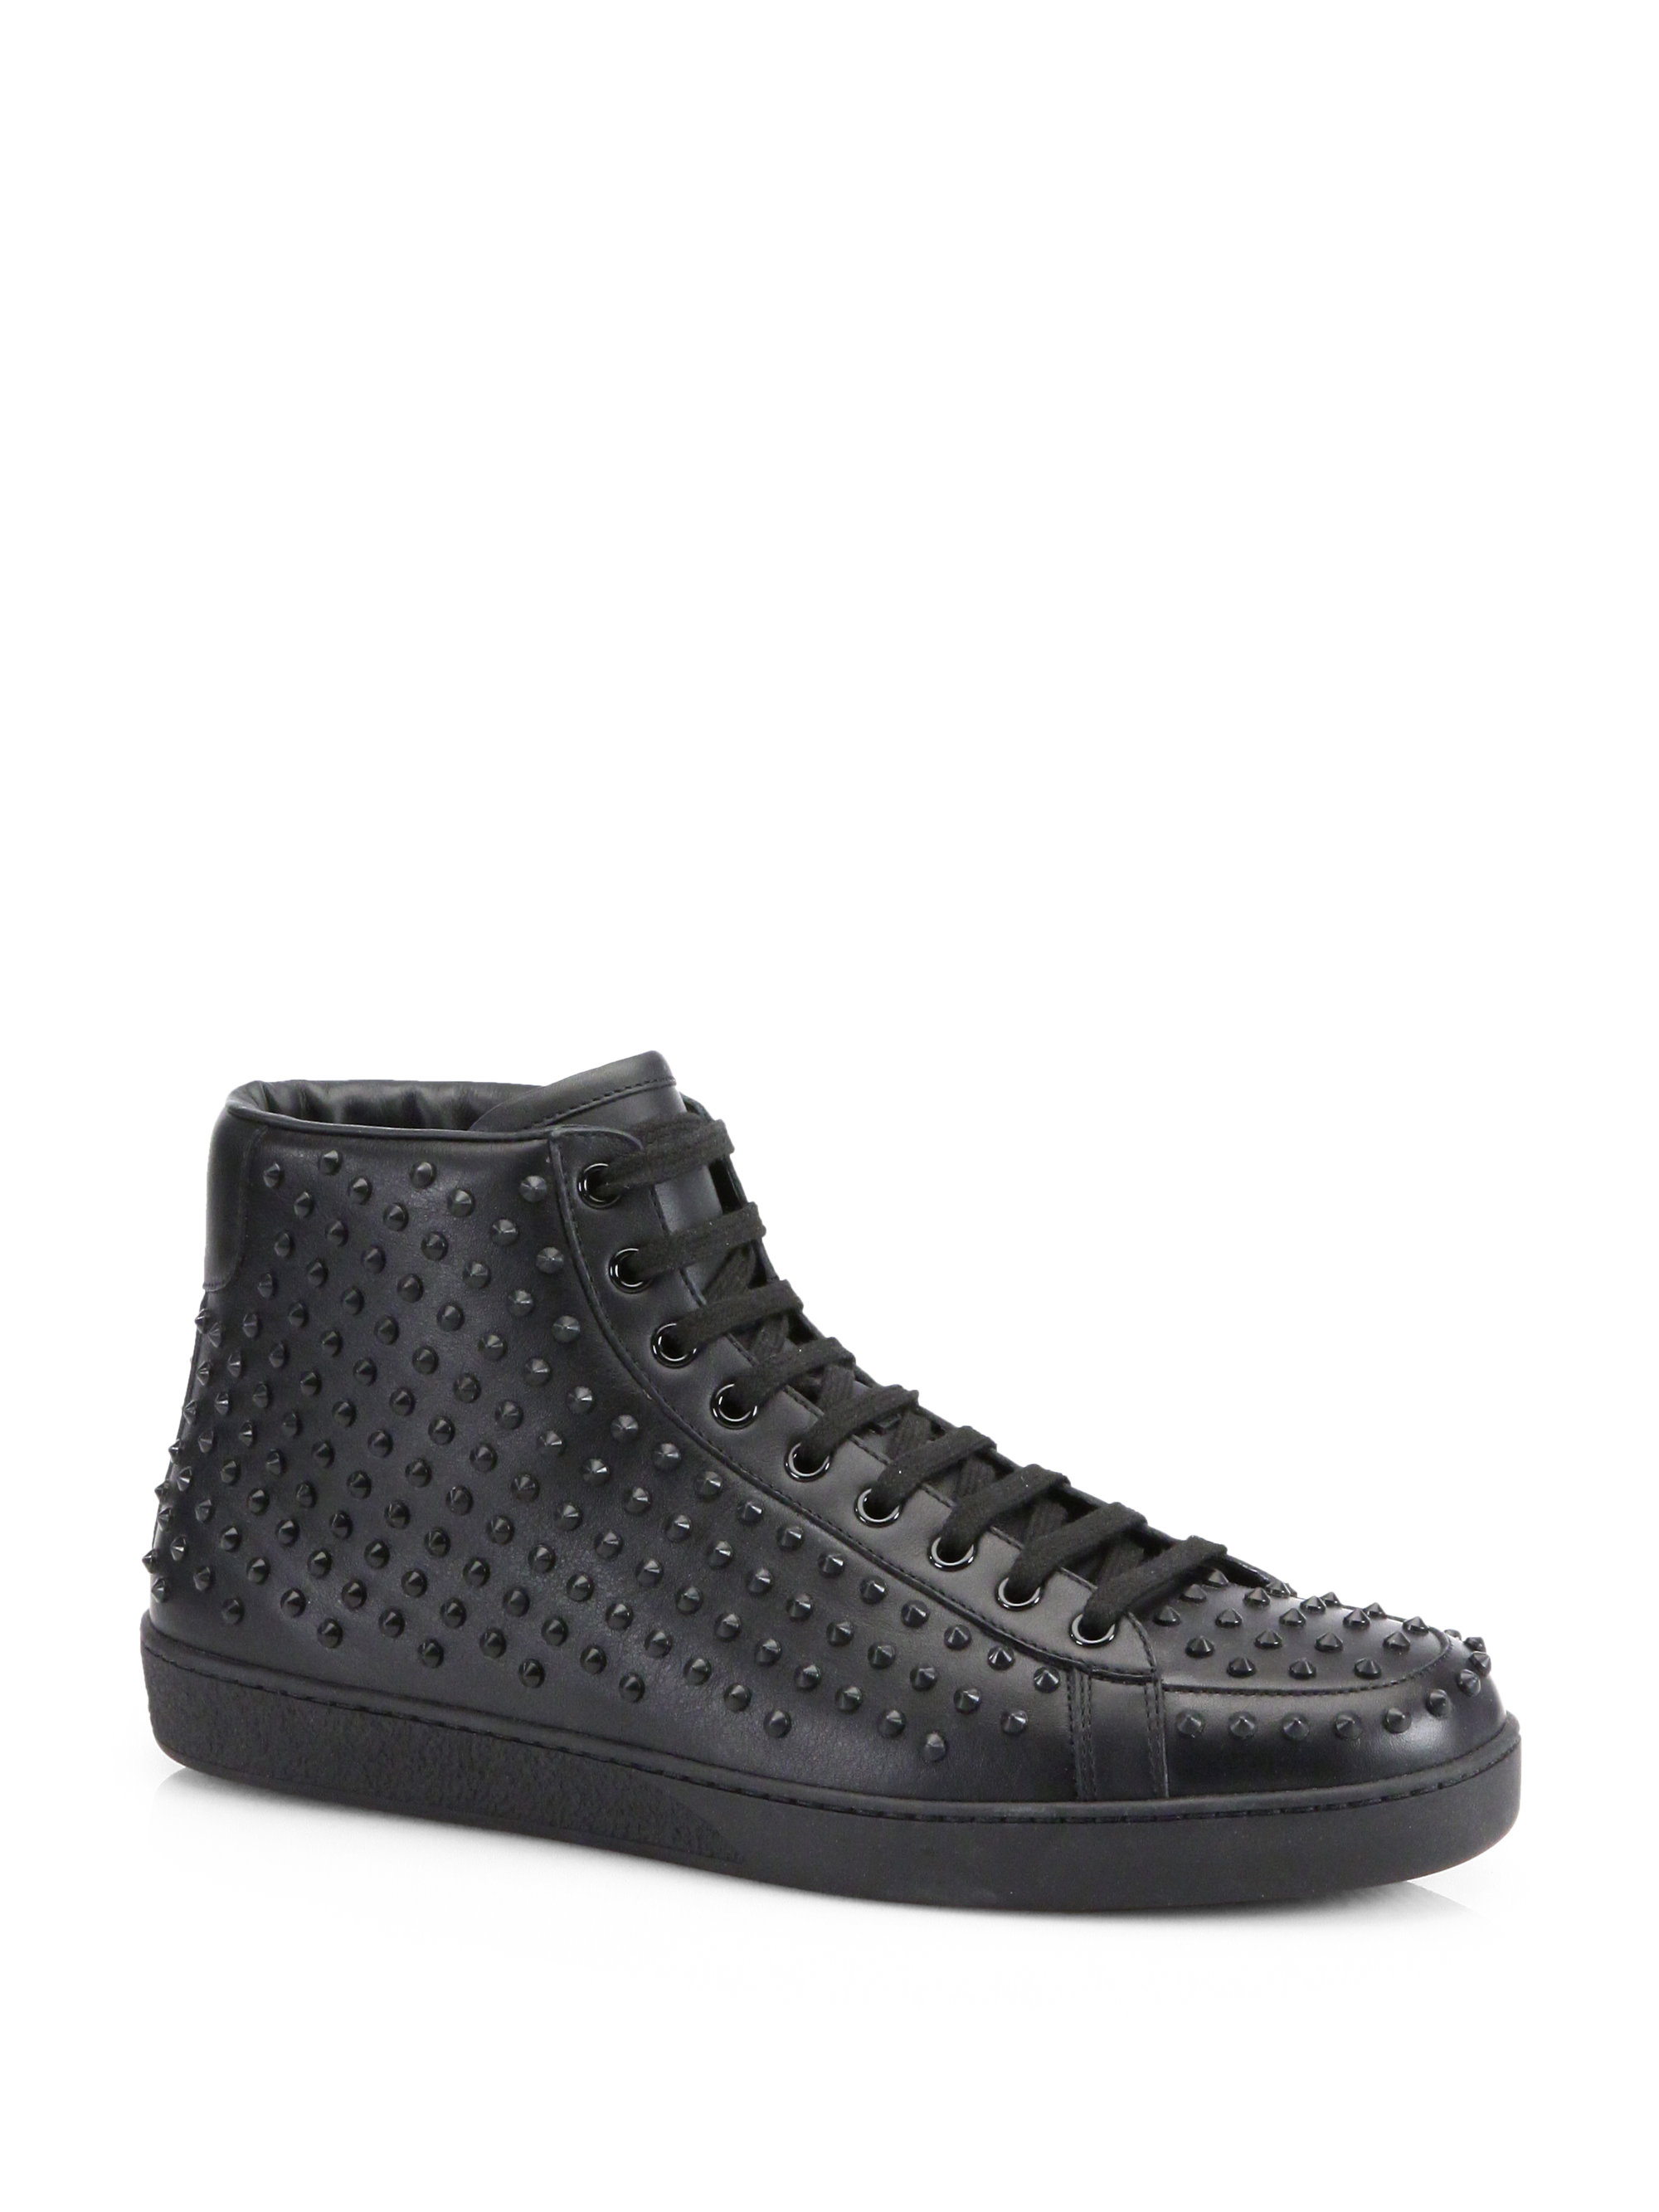 Lyst - Gucci Brooklyn Studded Hightop Sneakers in Black for Men